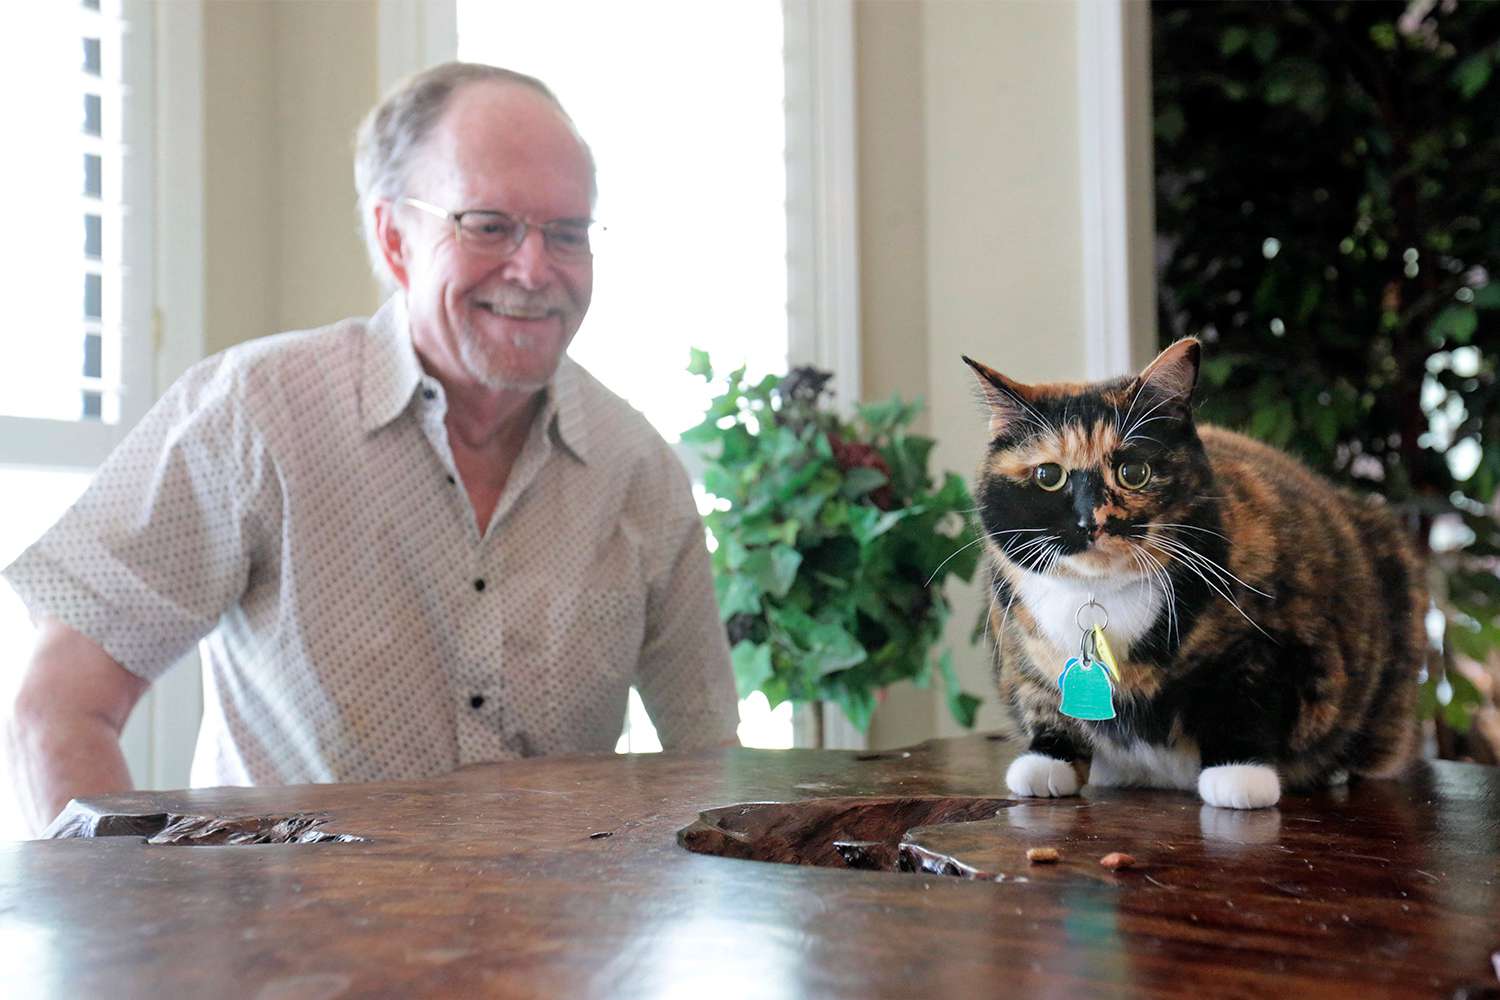 Fred Everitt of Tupelo, Miss., is all smiles after his cat, "Bandit", alerted him in the middle of the night that two men were trying to break into the back door of his home, July 29, 2022, in Tupelo, Miss.